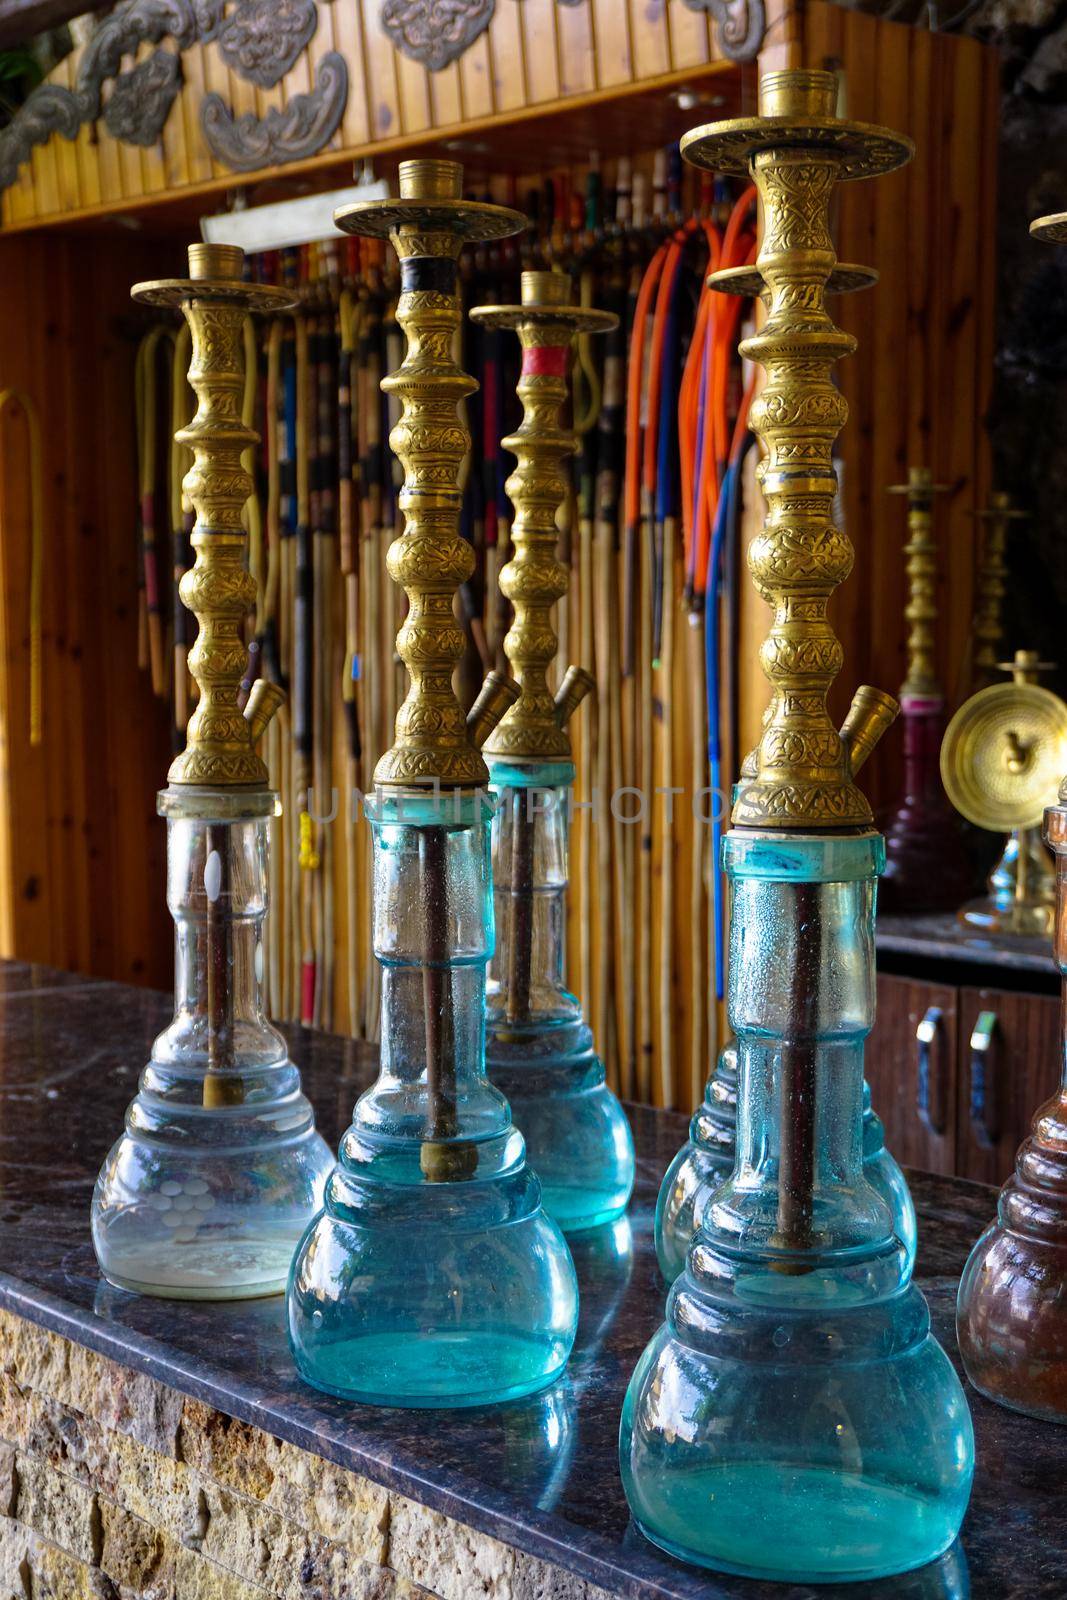 Traditional Turkish hookah close up view